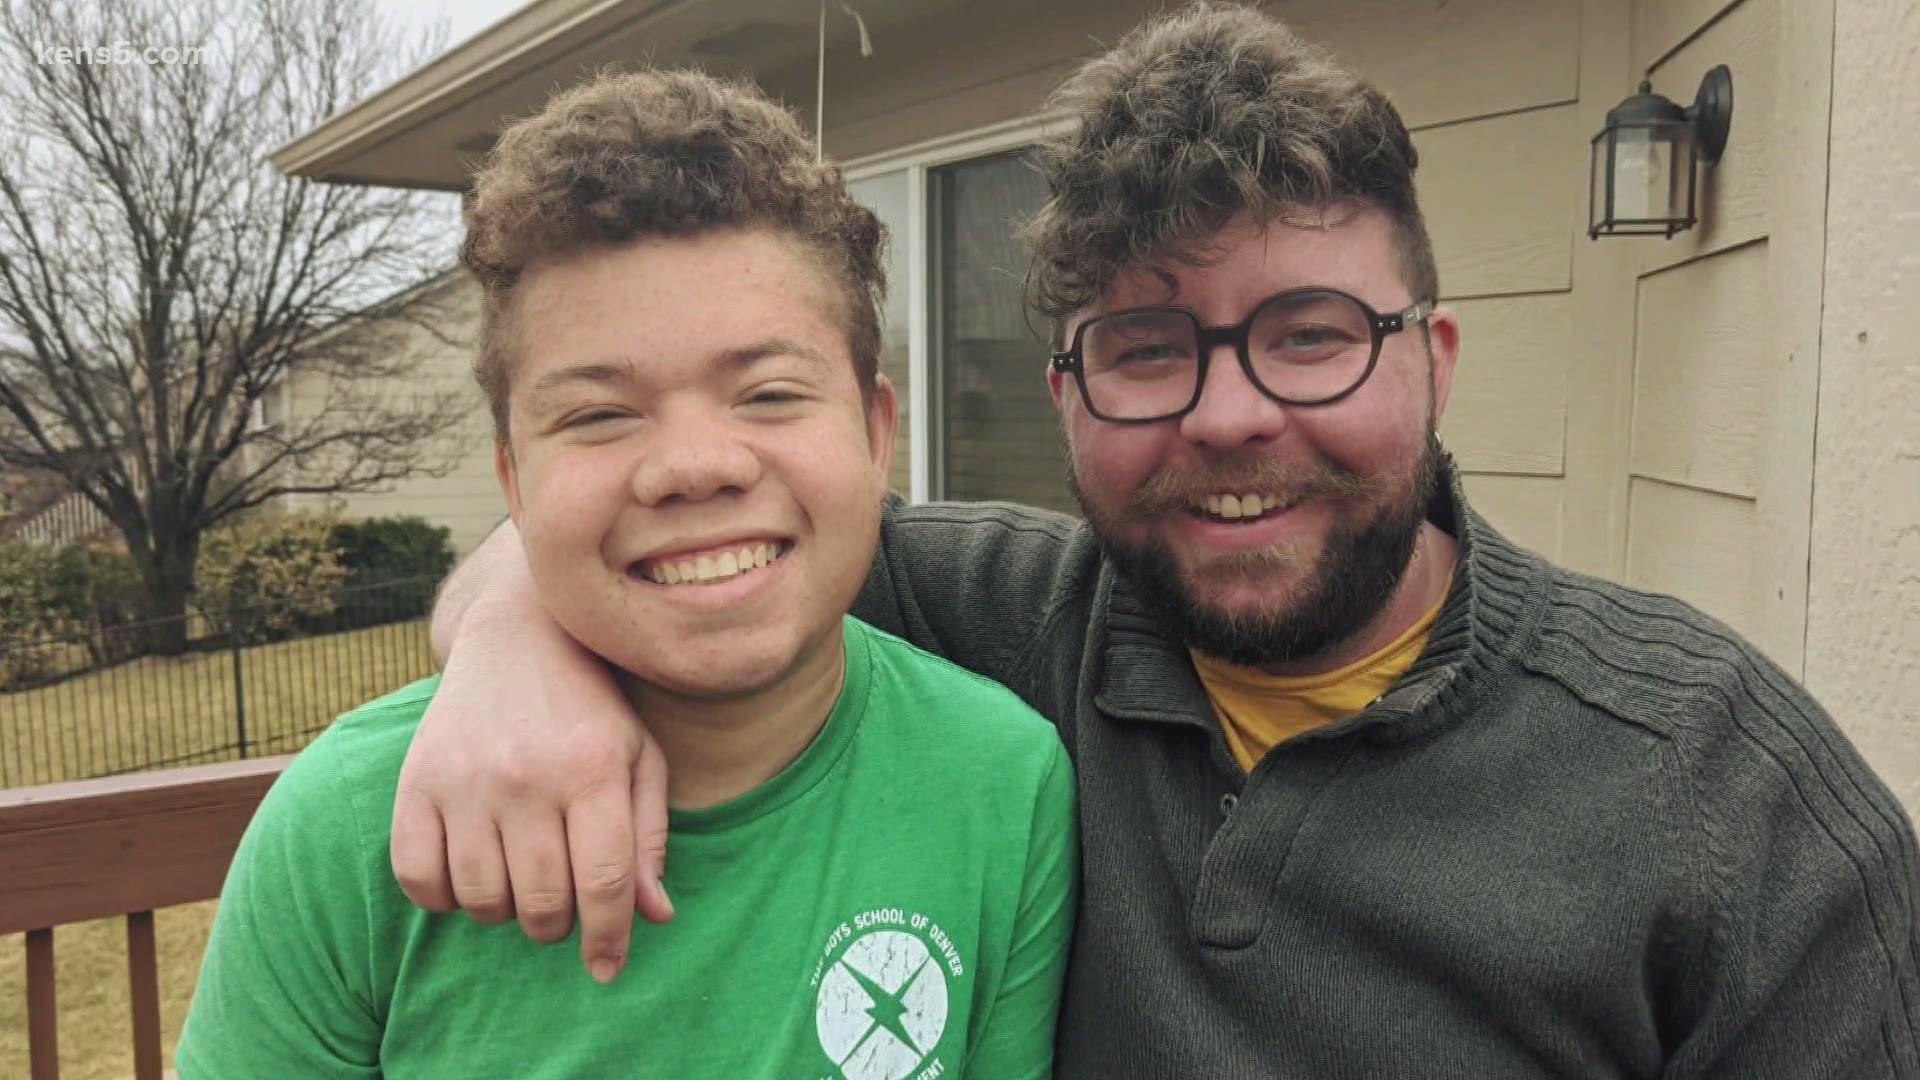 In 2019, Damien told his teacher, Finn Lanning, that health issues would keep him from returning to school. Two years later, Damien is healthier, and Finn is family.